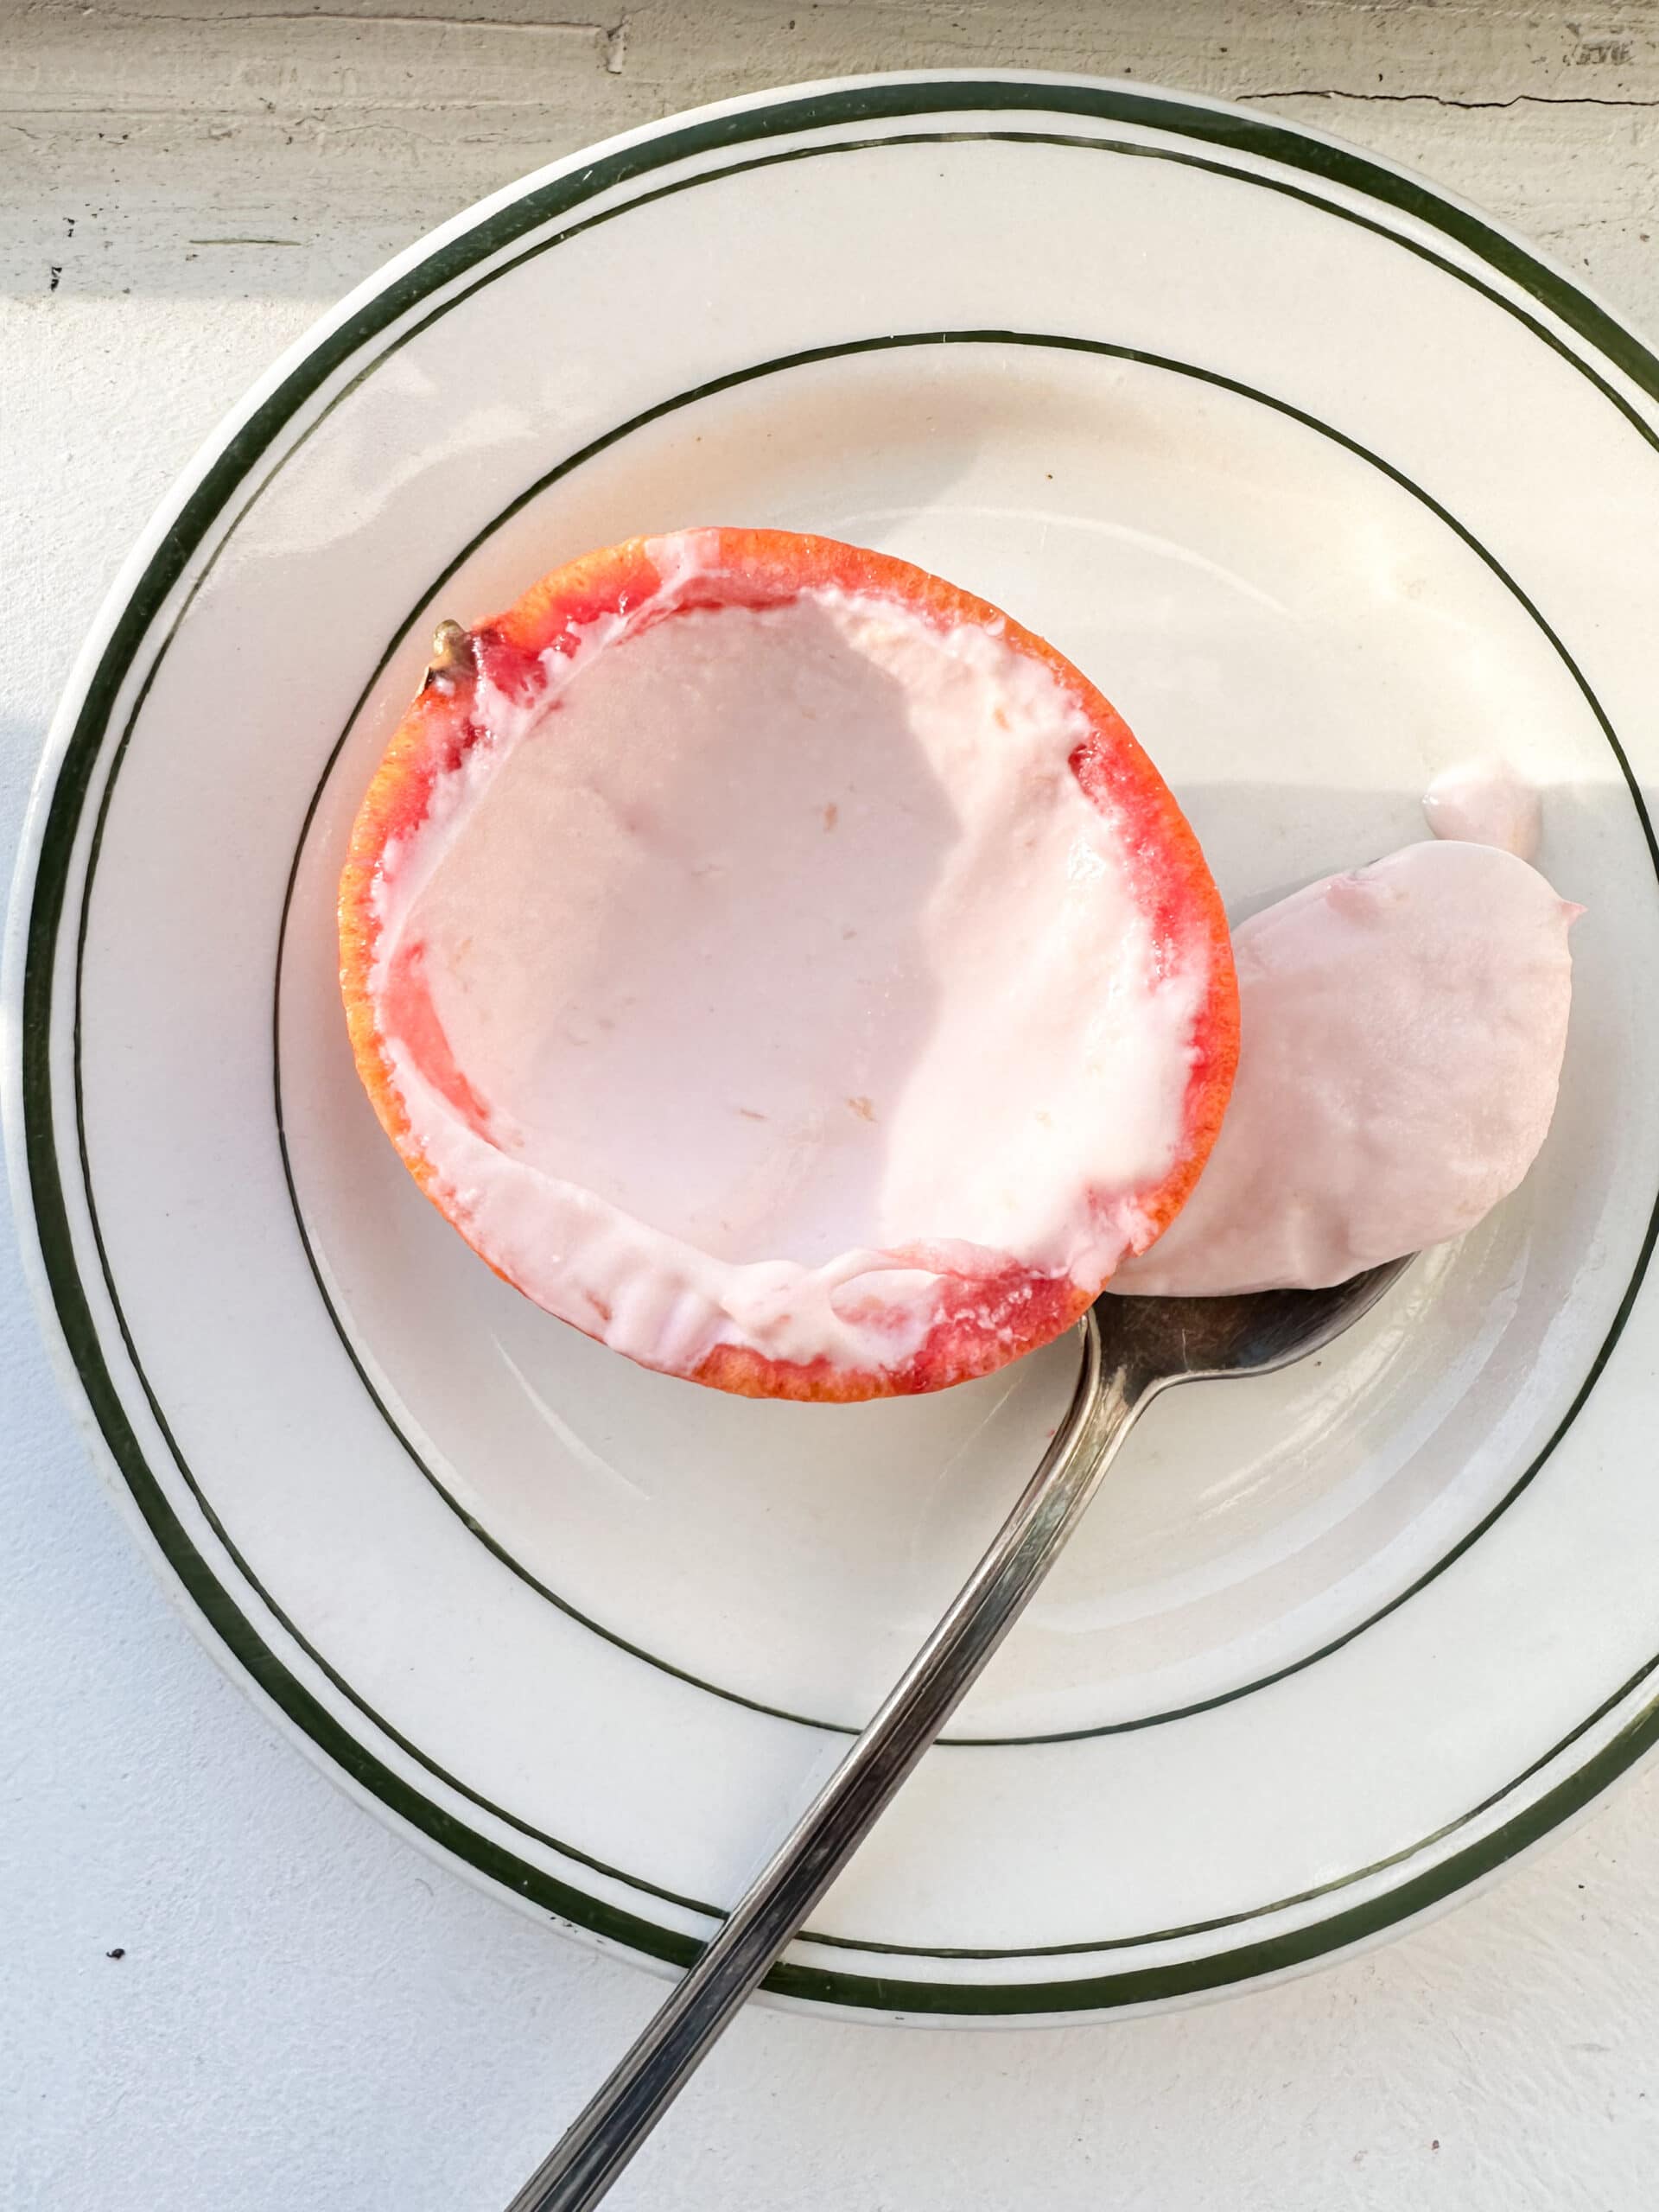 Overhead view of a blood orange posset with a spoonful taken out on a white and green plate.